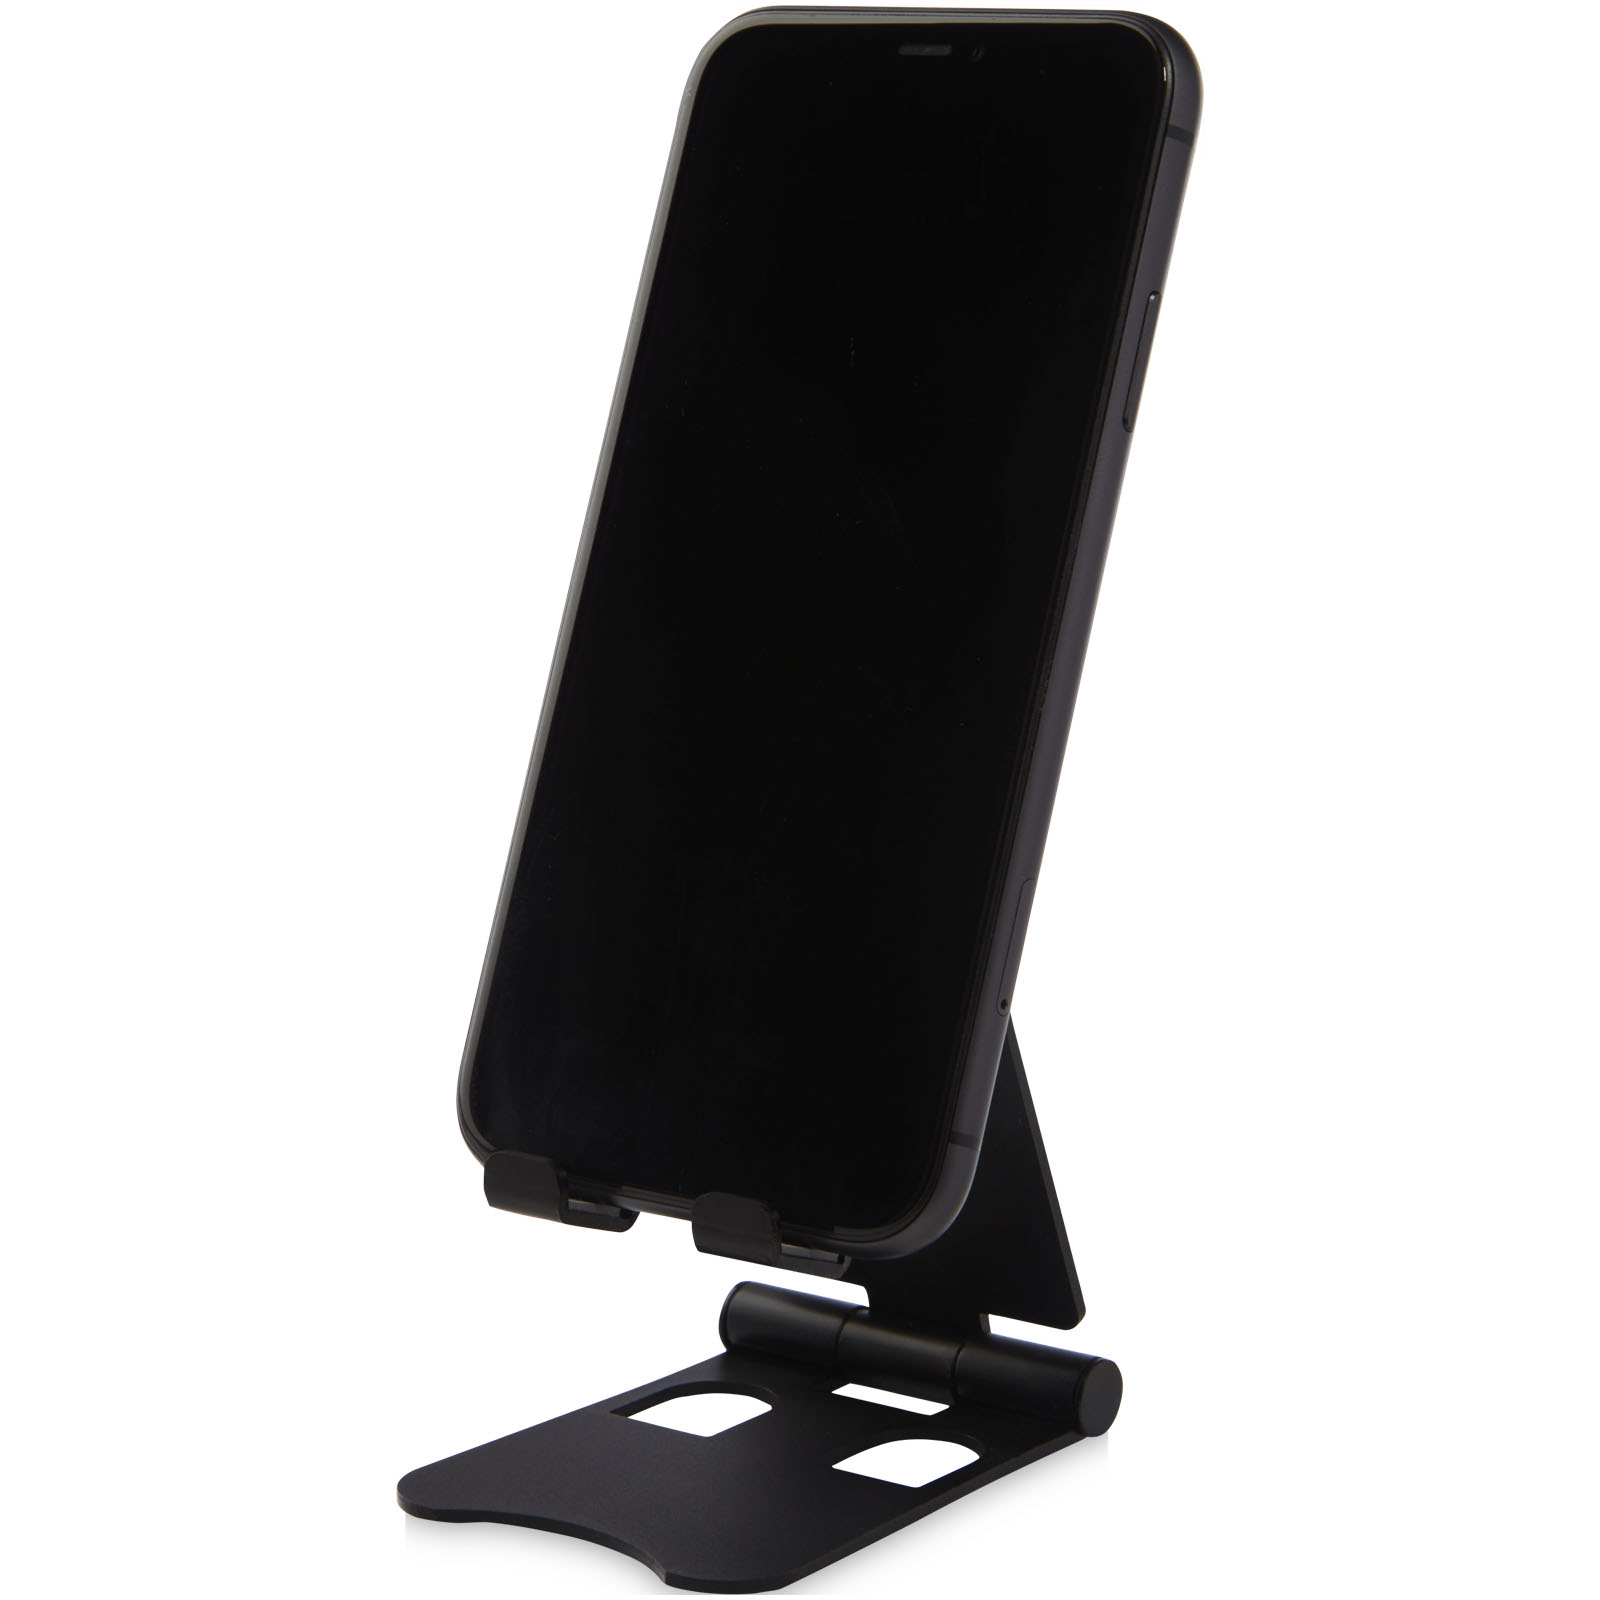 Advertising Stands & Holders - Rise foldable phone stand